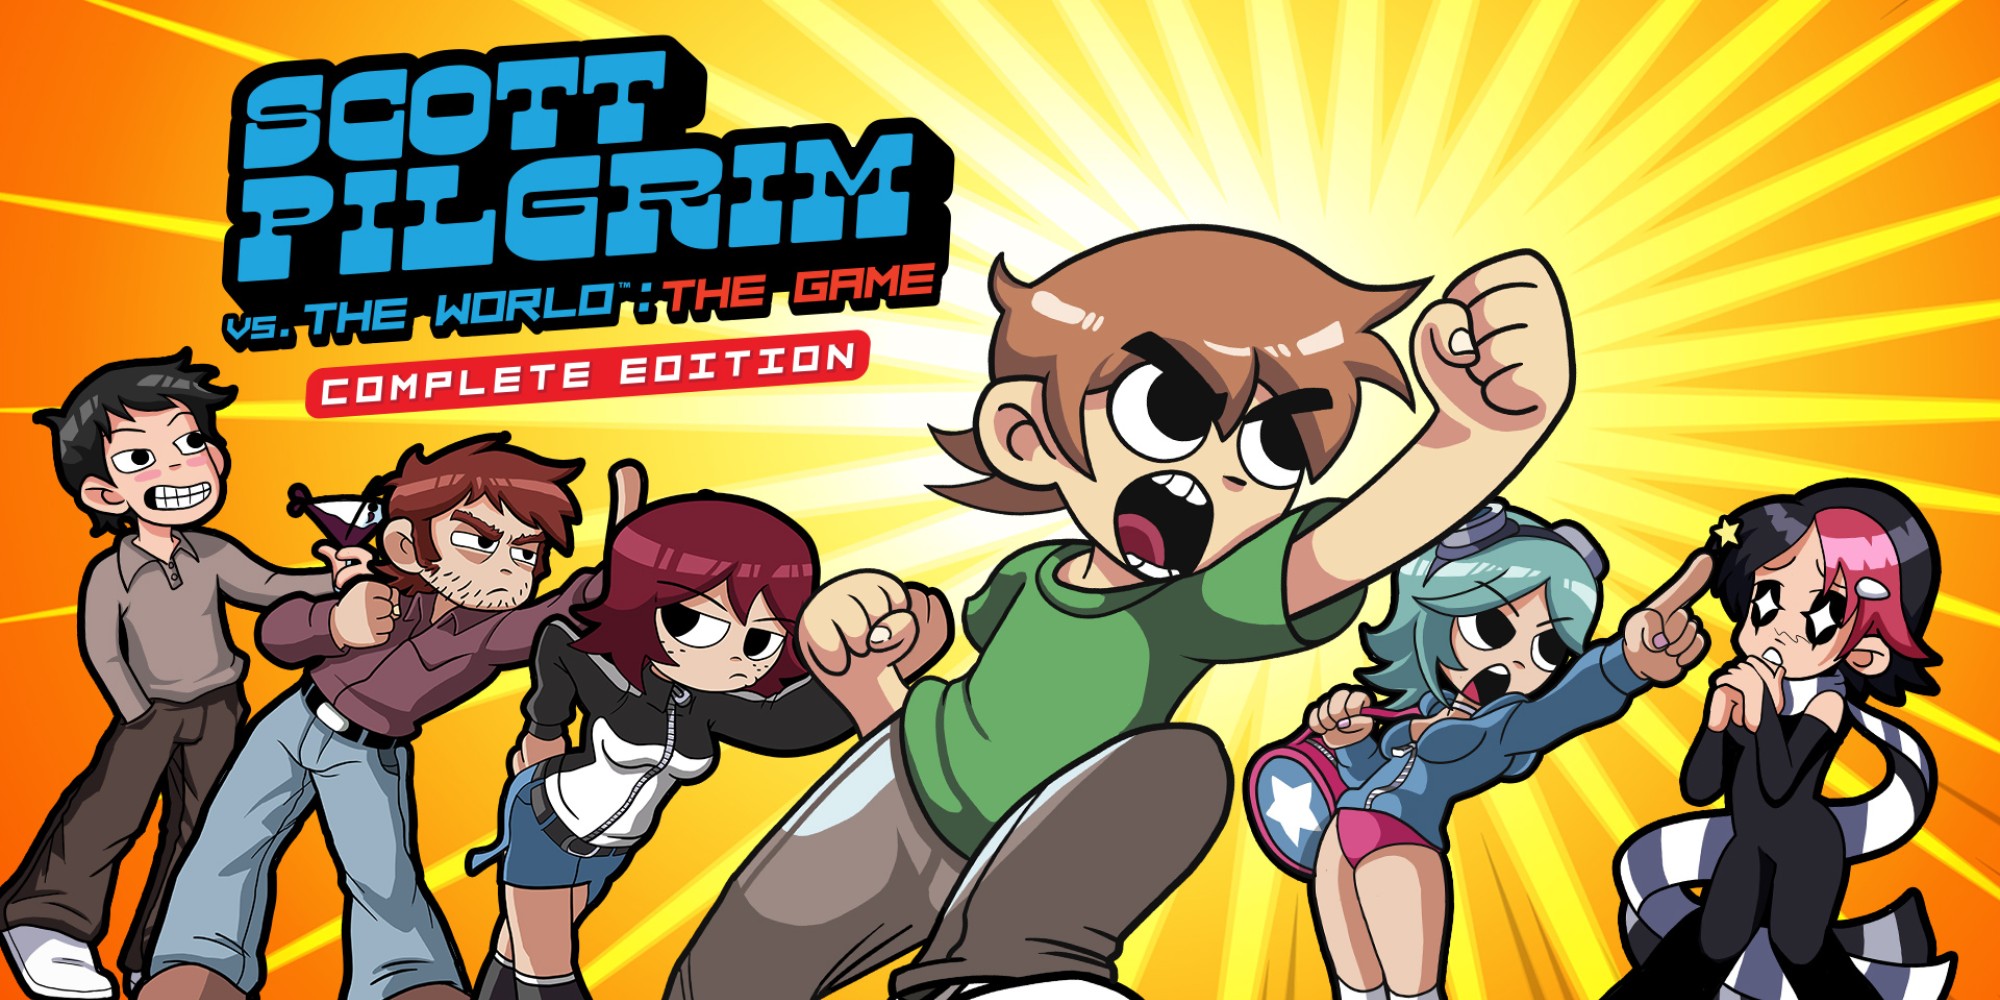 Scott Pilgrim vs. The World™: The Game – Complete Edition Switch Review